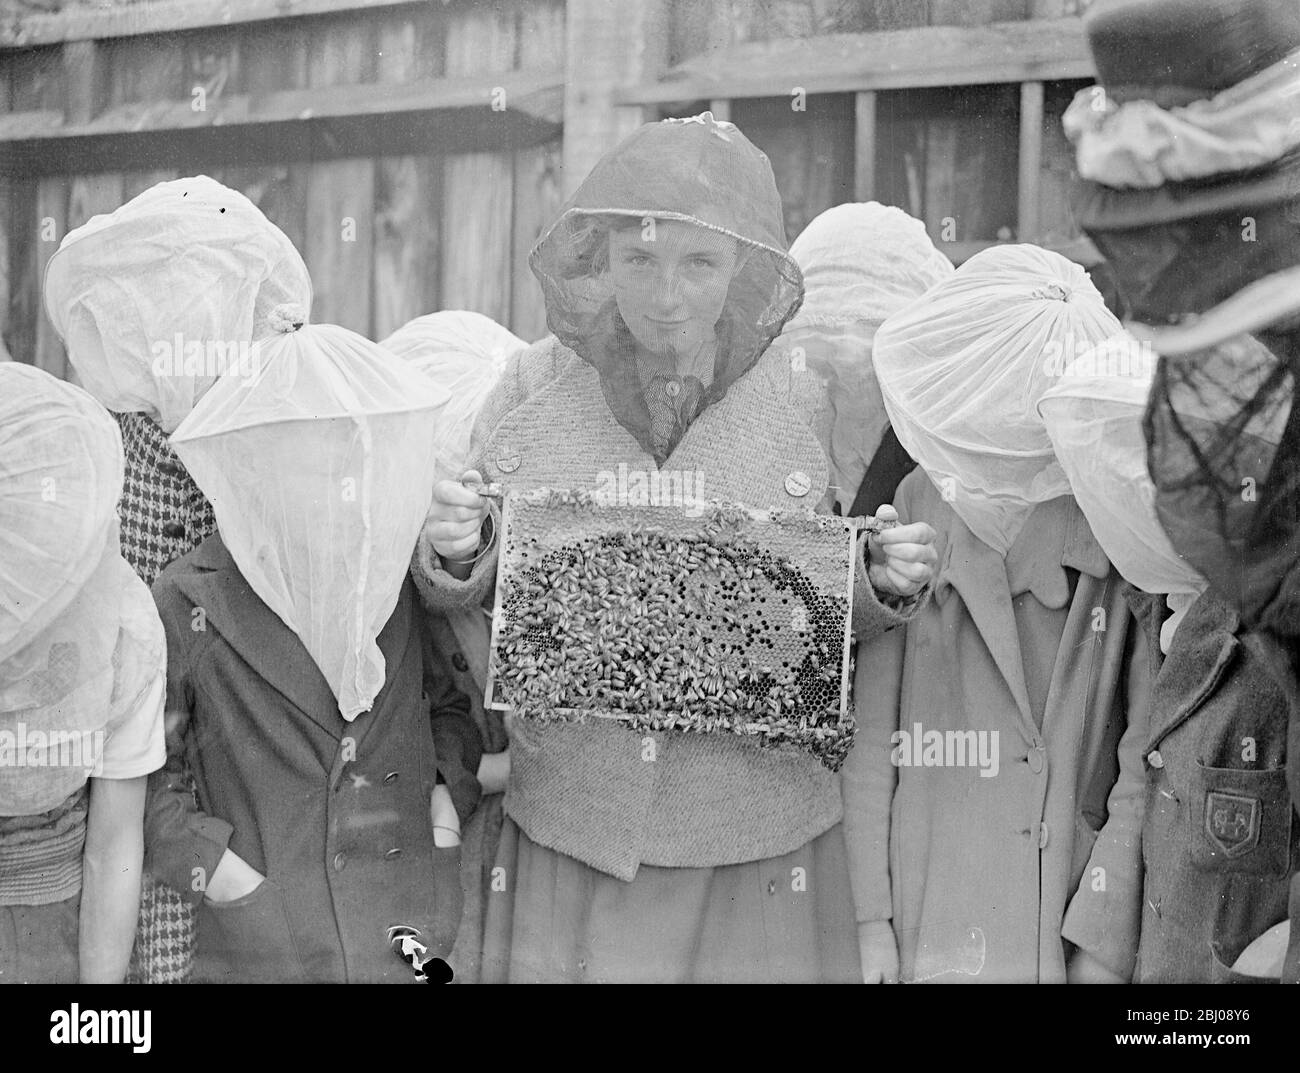 A beekeeping class is an innovation at Wood Lane, Shepherd's Bush, London open-air school. The pupils are protected by gauze face masks and handled the bees without fear. A pupil holding a brood frame of bees. - 1 September 1937 Stock Photo